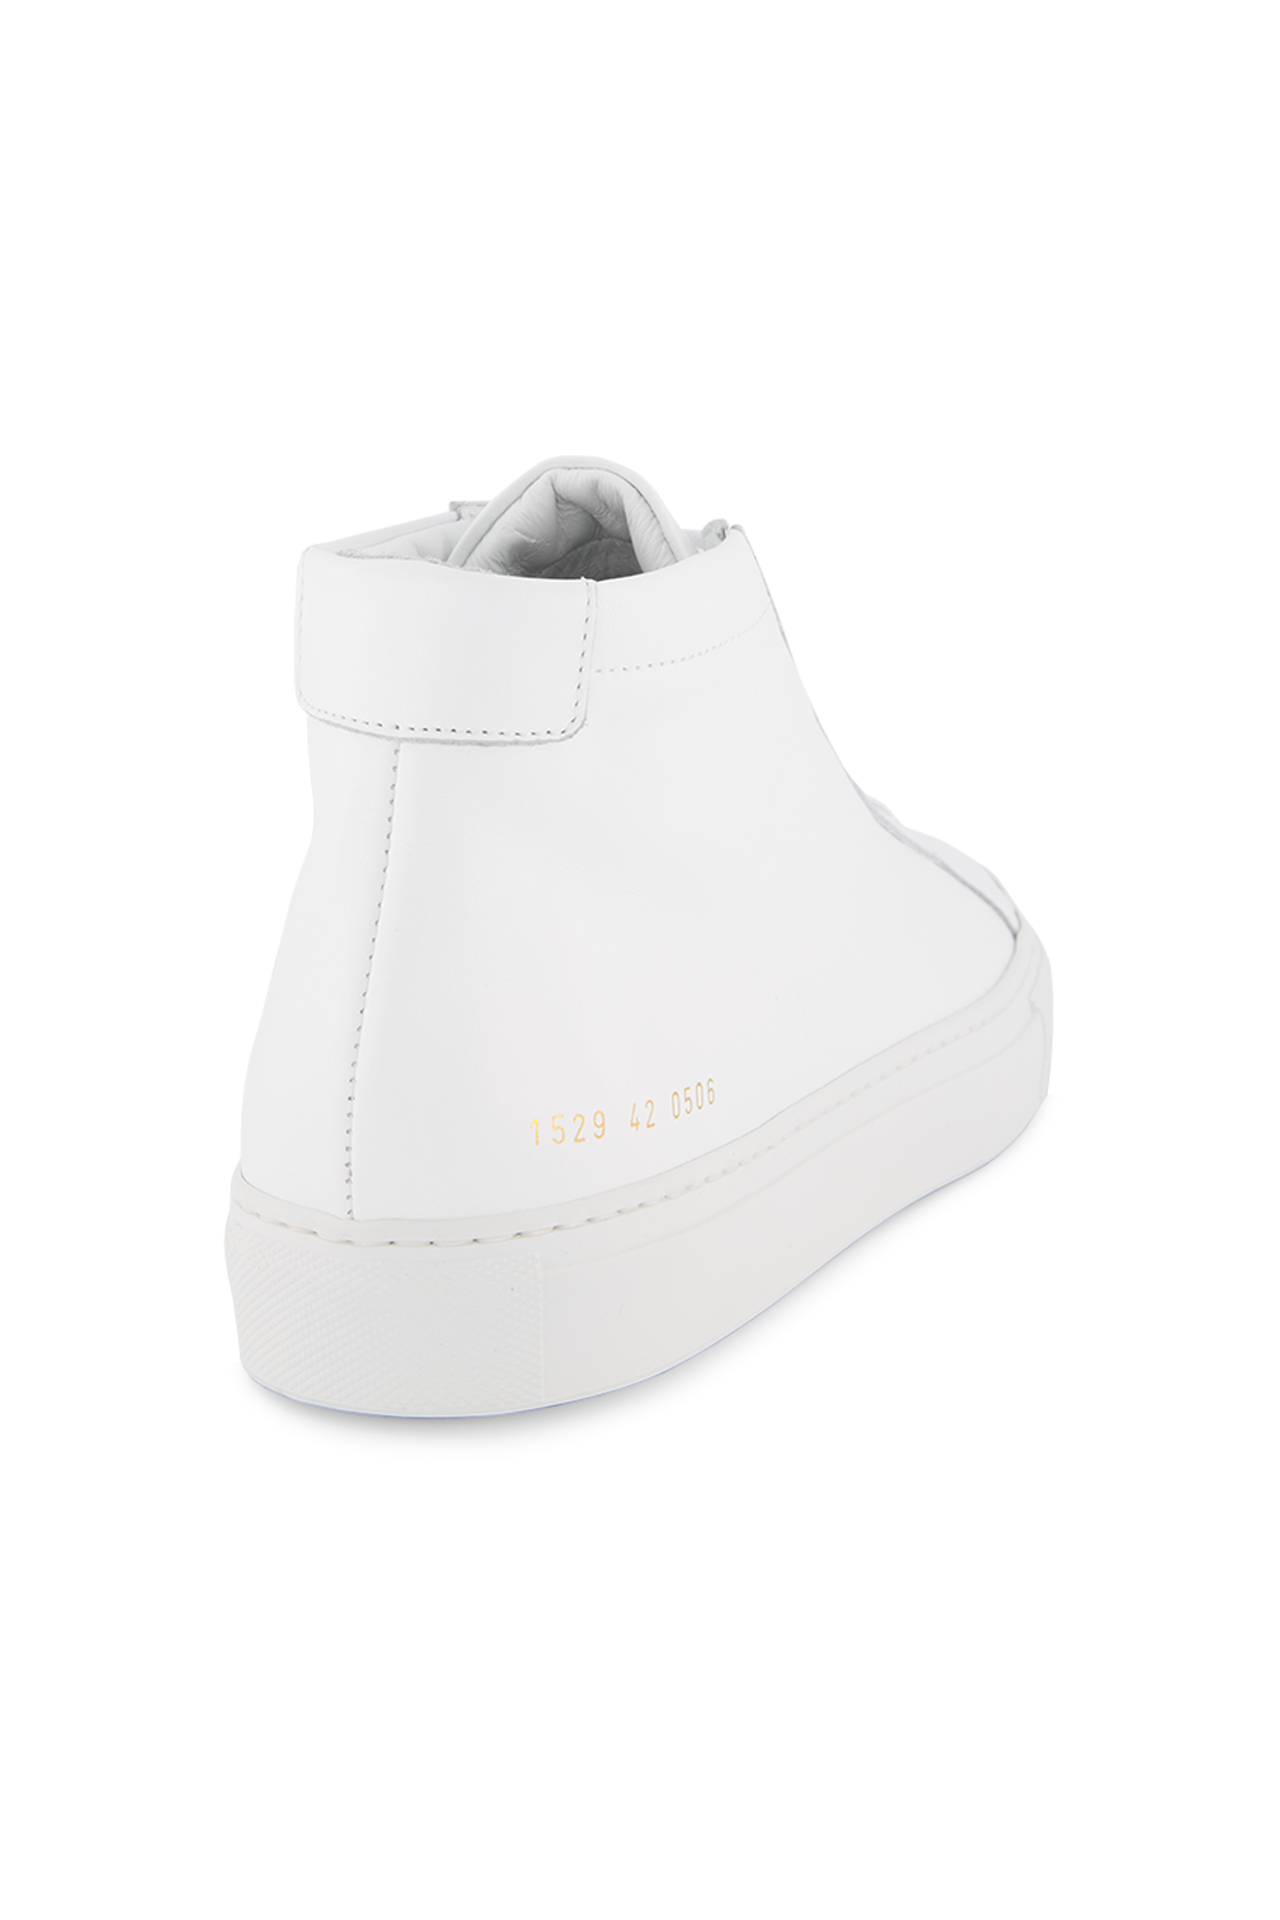 Back angled view image of Common Projects Original Achilles Mid Sneaker Leather White (600644222987)